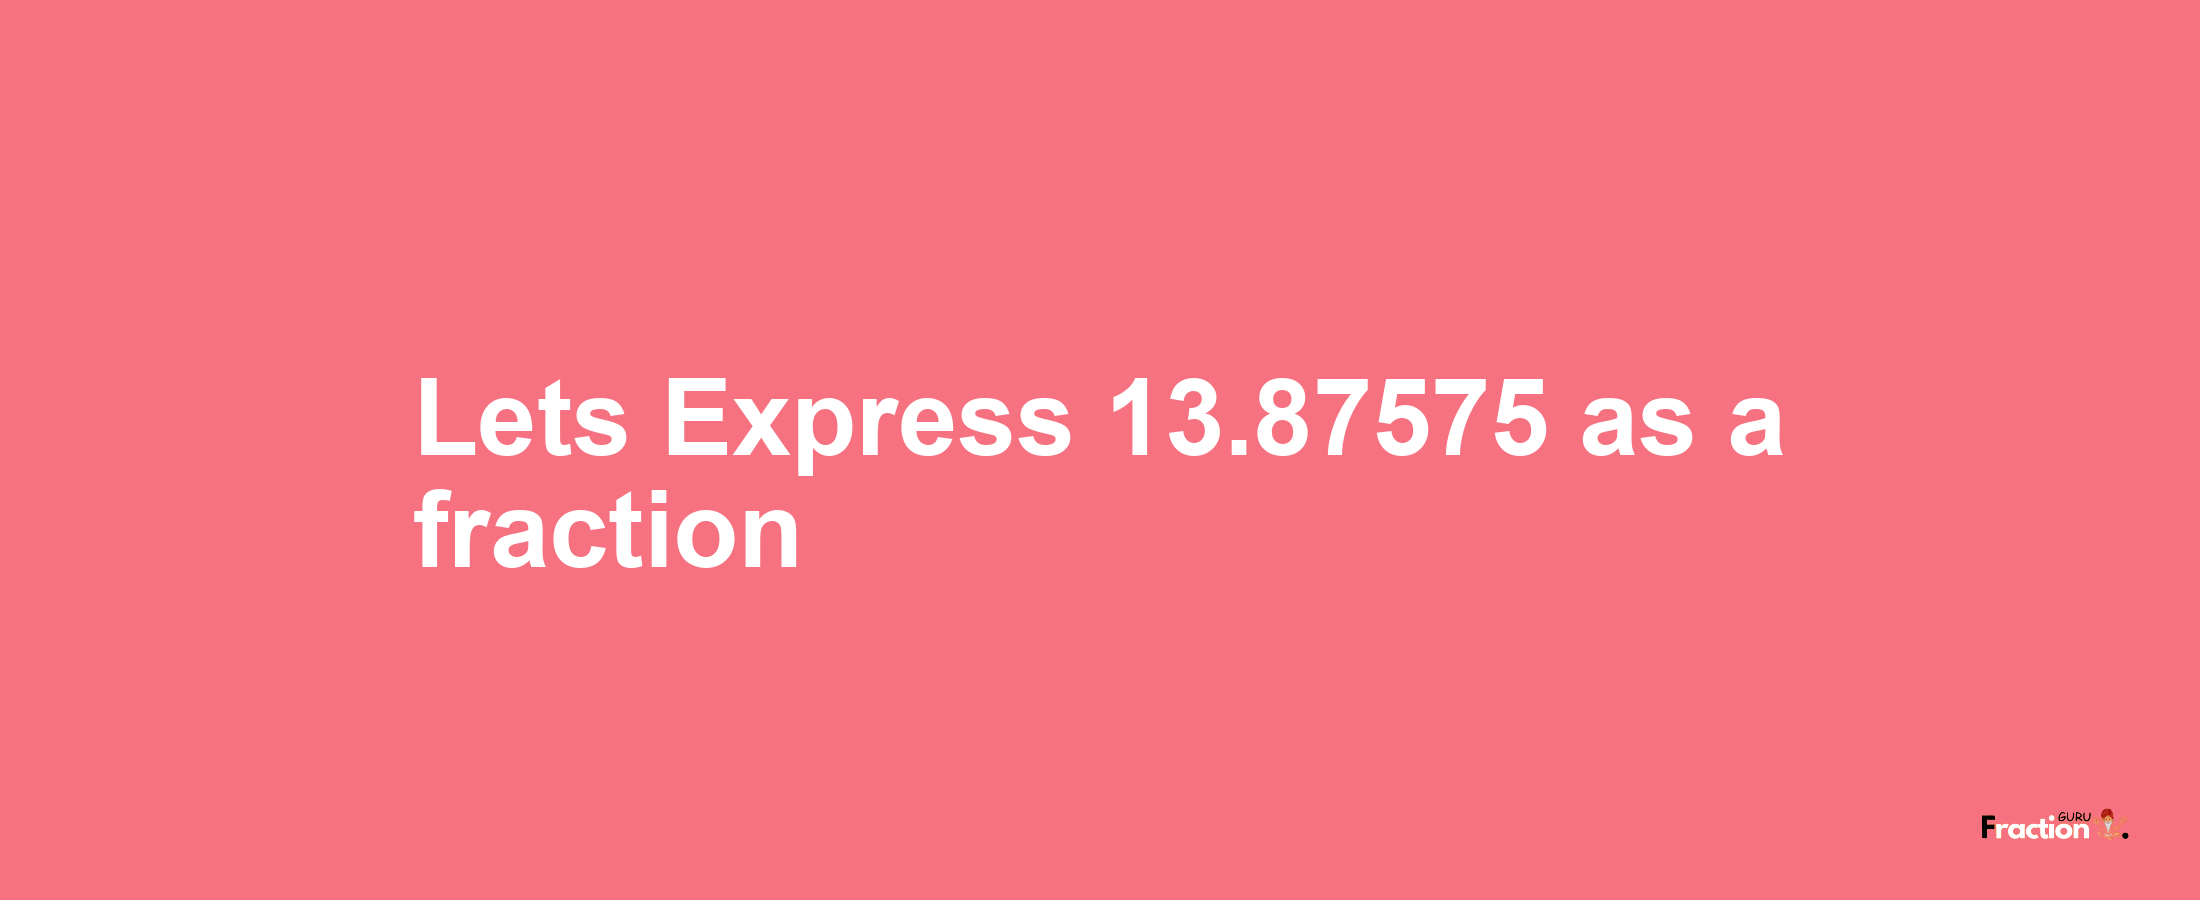 Lets Express 13.87575 as afraction